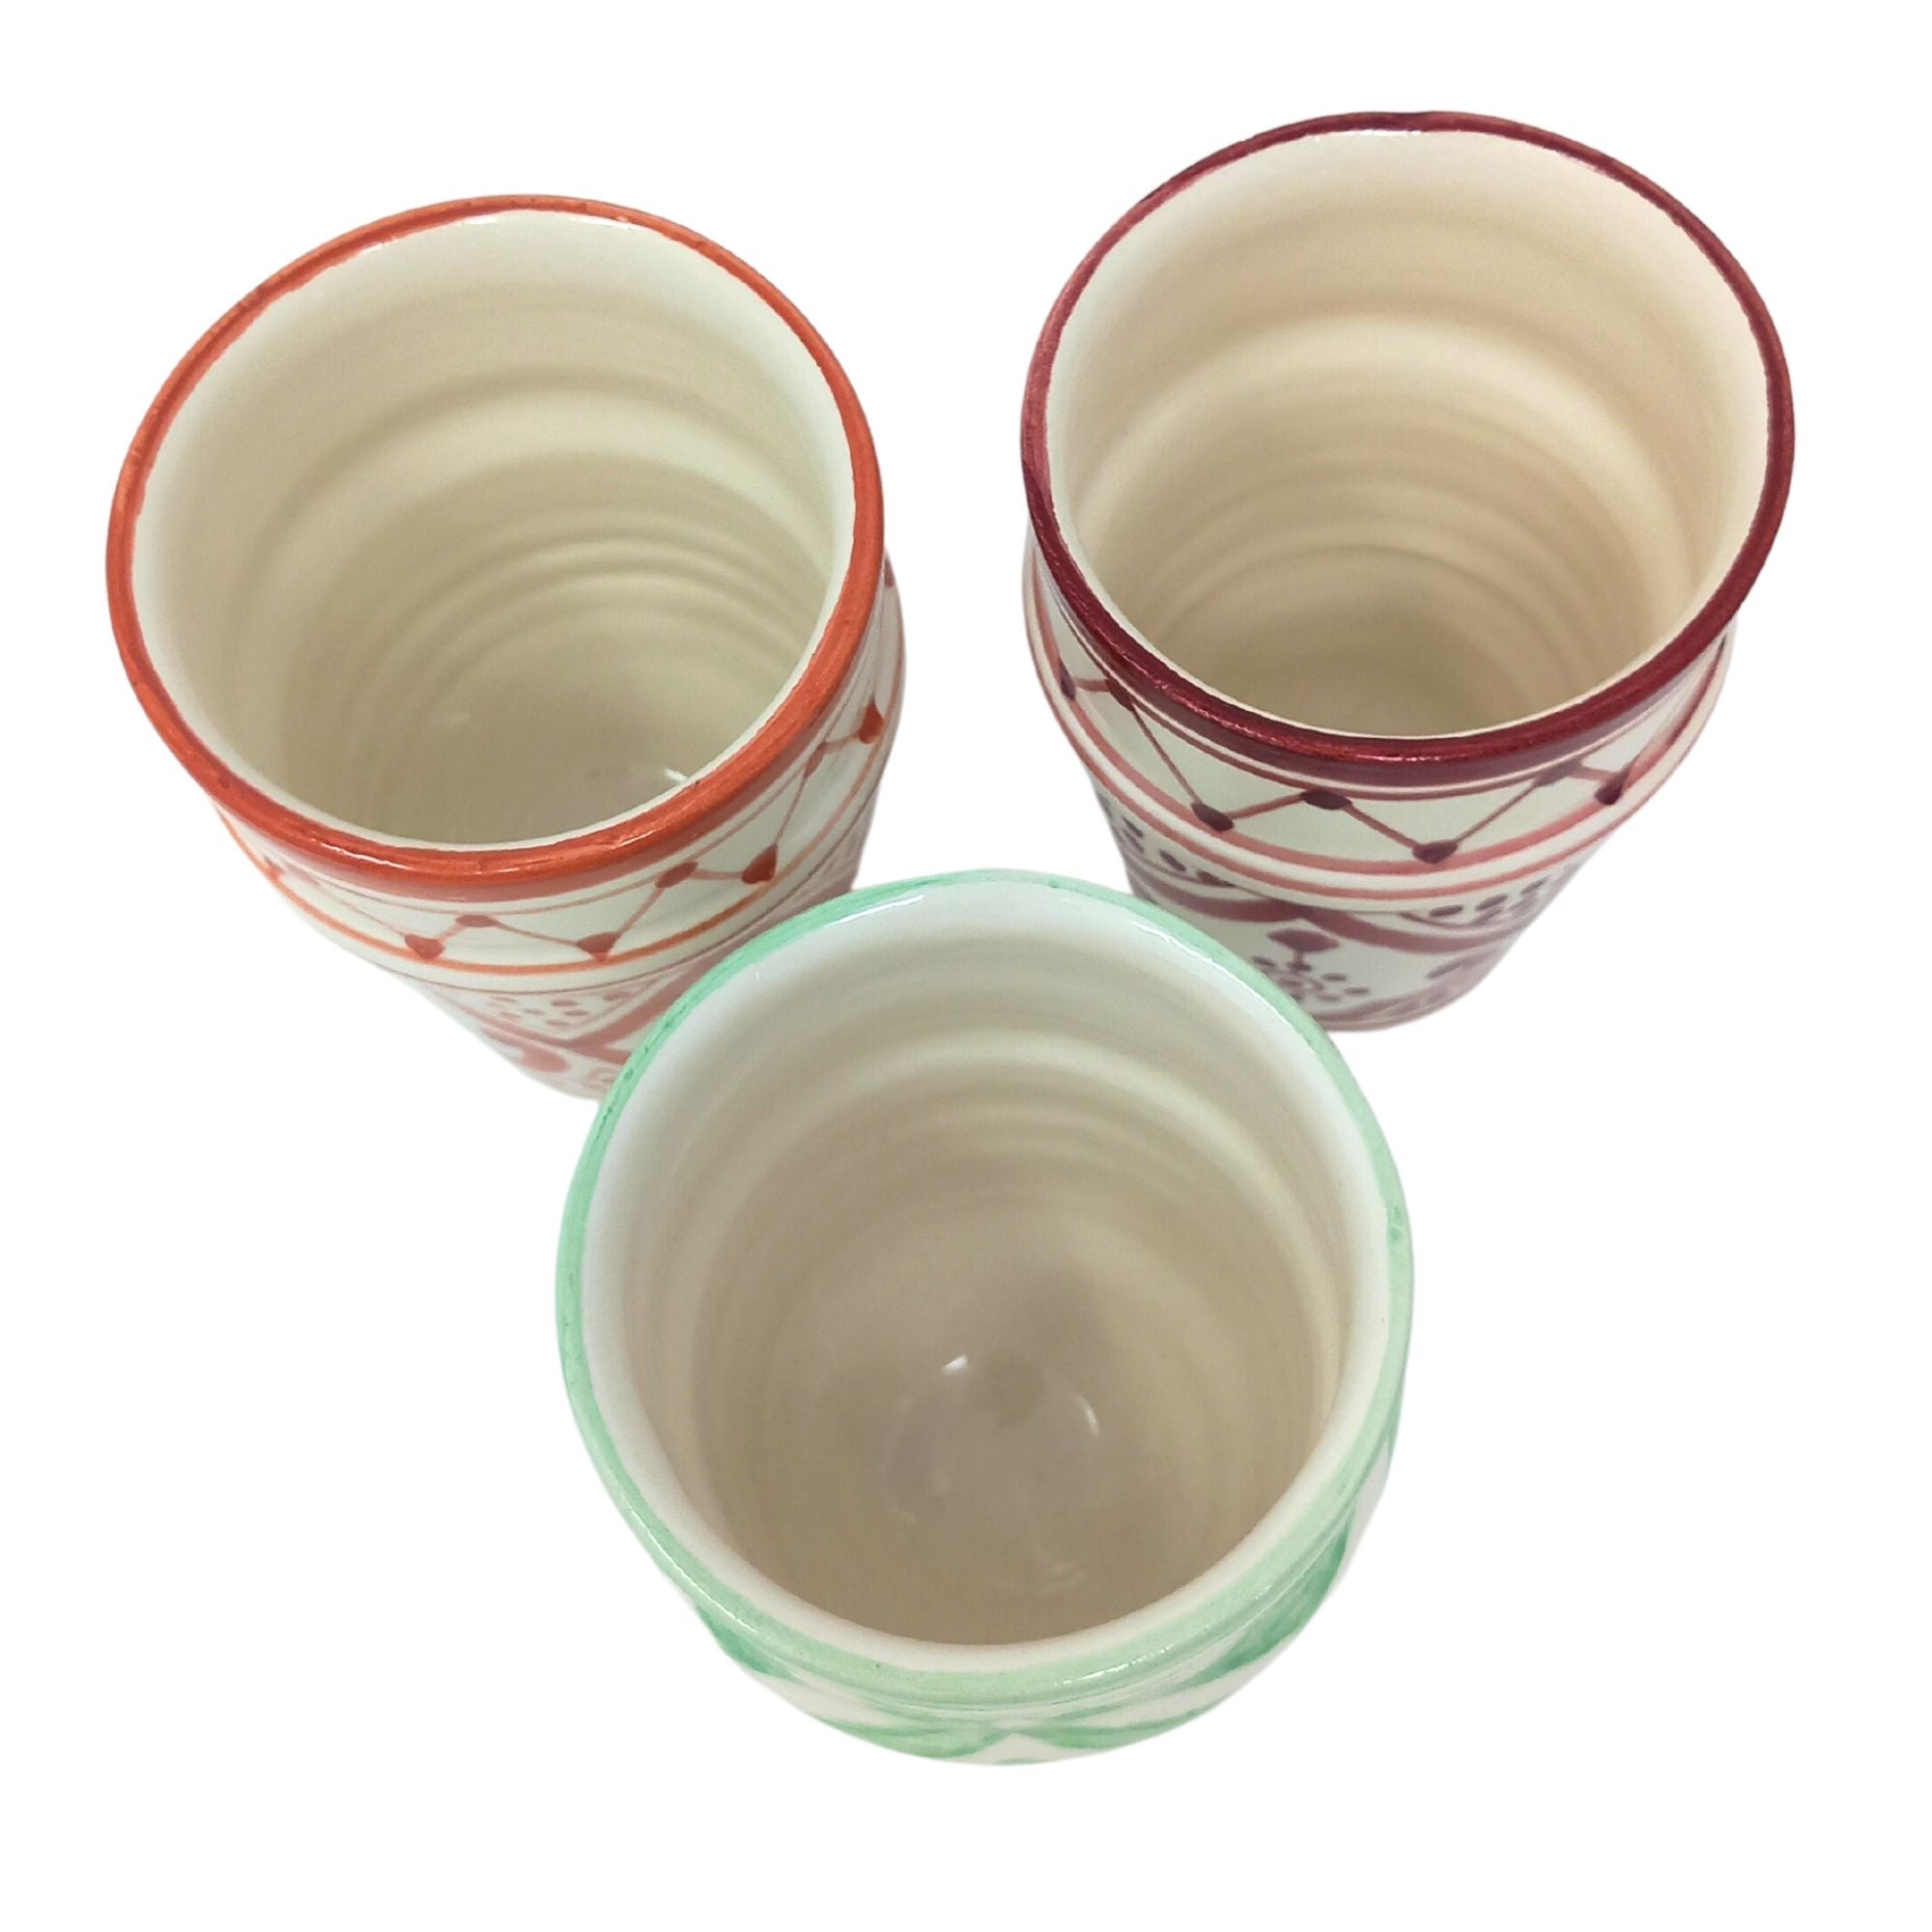 top view picture of handcrafted ceramic mugs in three colours: orange, mint green and burgundy red